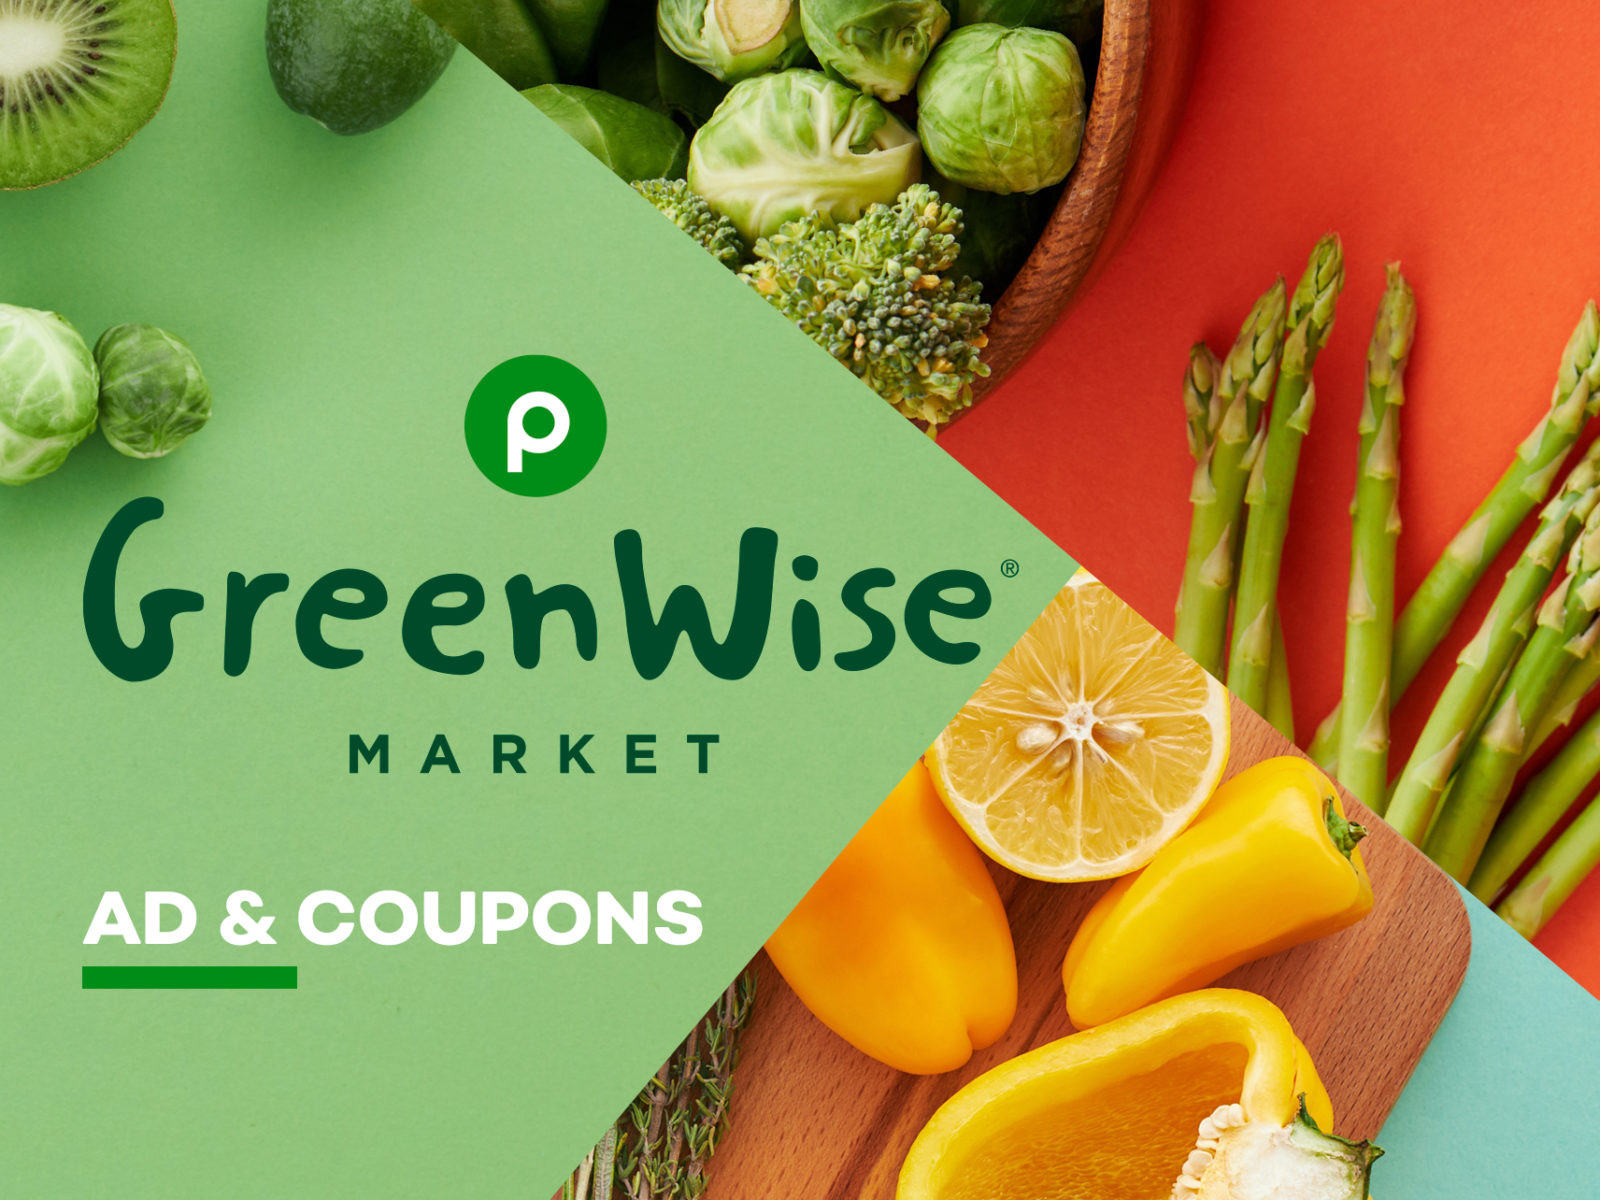 Publix GreenWise Market Ad & Coupons Week Of 8/4 to 8/10 (8/3 to 8/9 For Some)